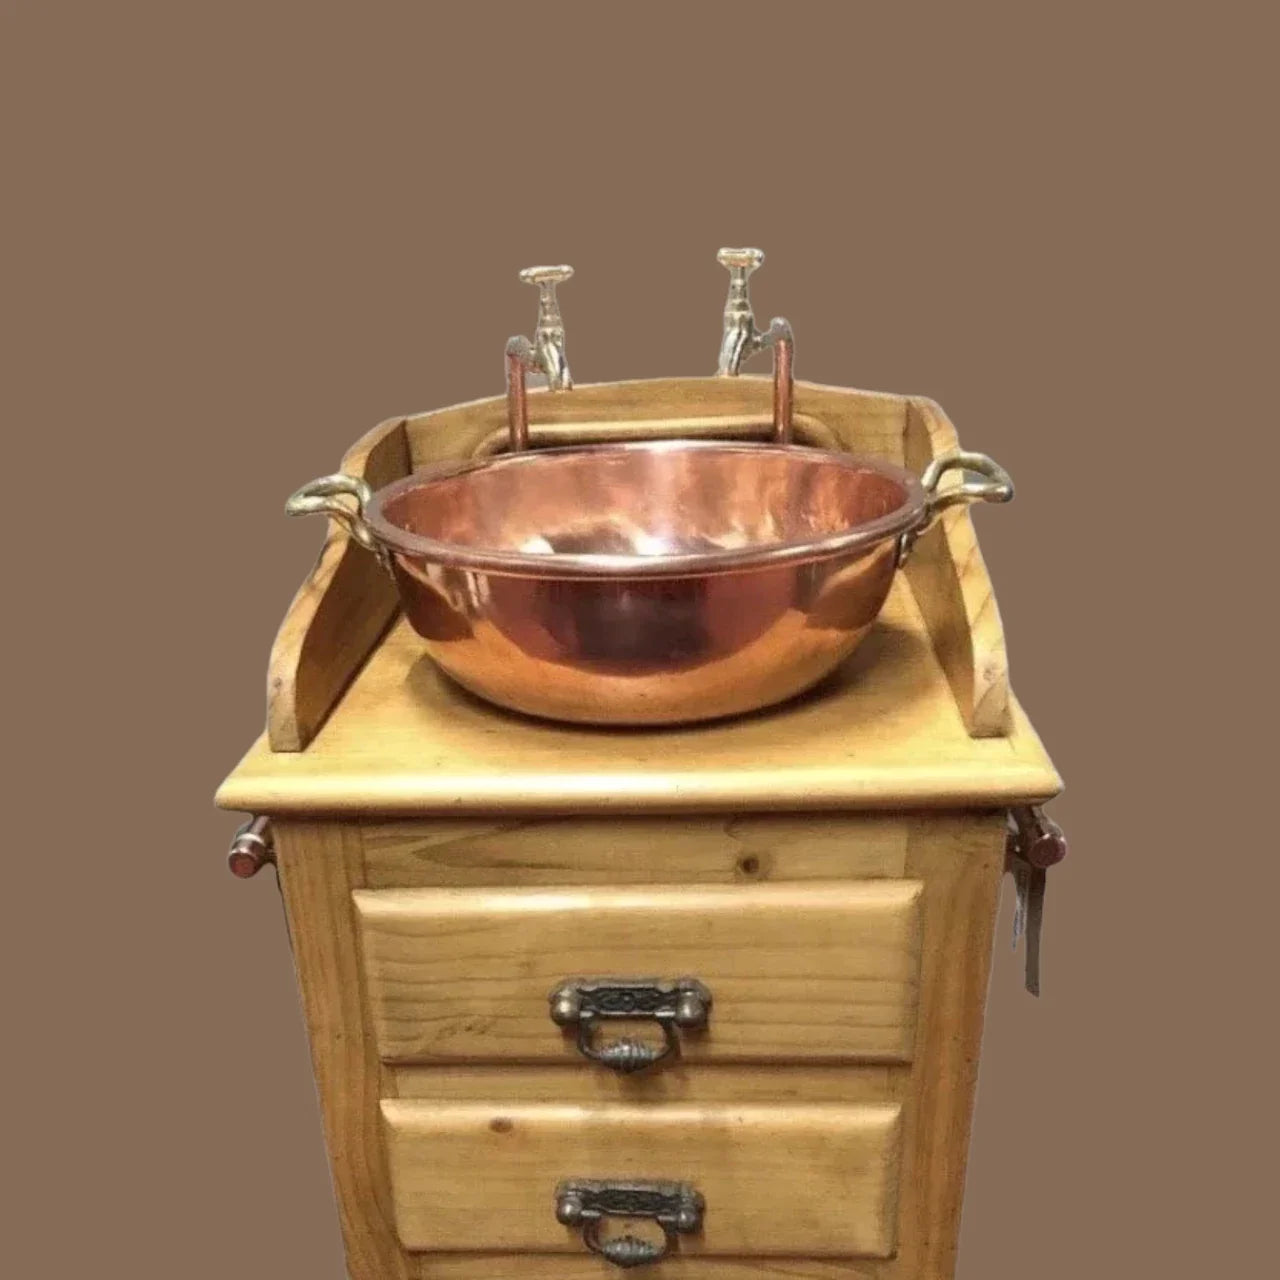 Copper Basins, Sinks and Handmade Brass and Copper Taps